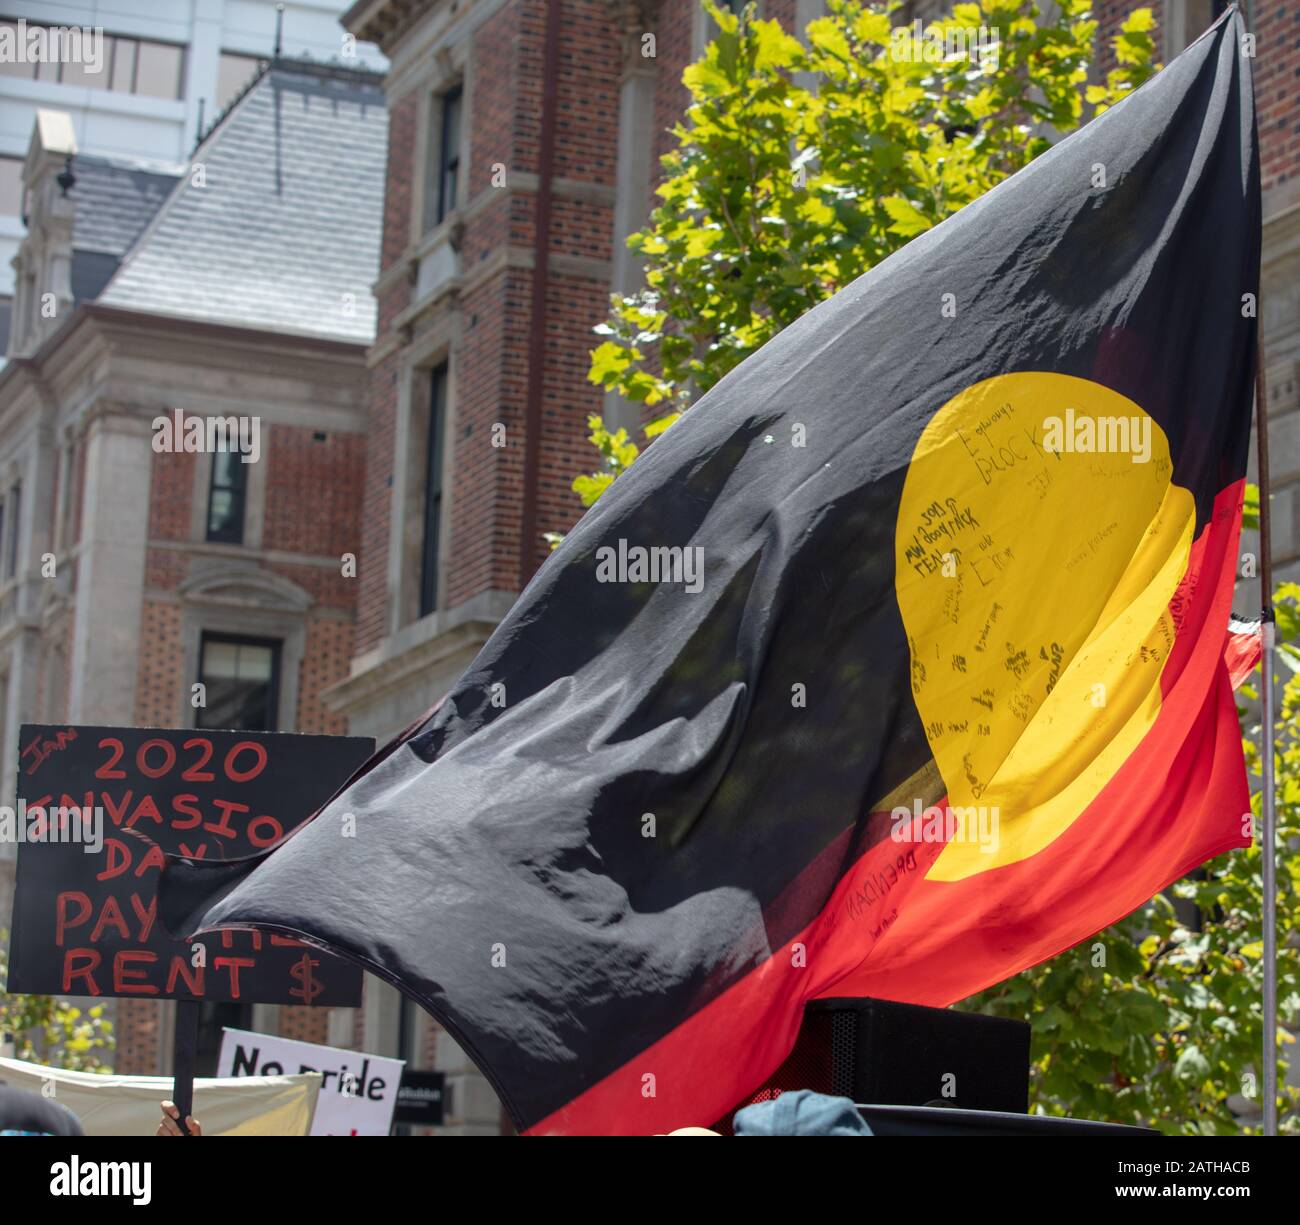 Perth, Australia. 26th January 2020. Invasion Day protests on stage and in the streets of central Perth, remembering the injustices done to the Aboriginals in the past and present. Protesters from all walks of life, demanding the national Australia Day and its celebrations to be scrapped and replaced by Invasion Day and to recognize Aboriginal rights. Credit: Joe Kuis / Alamy News Stock Photo